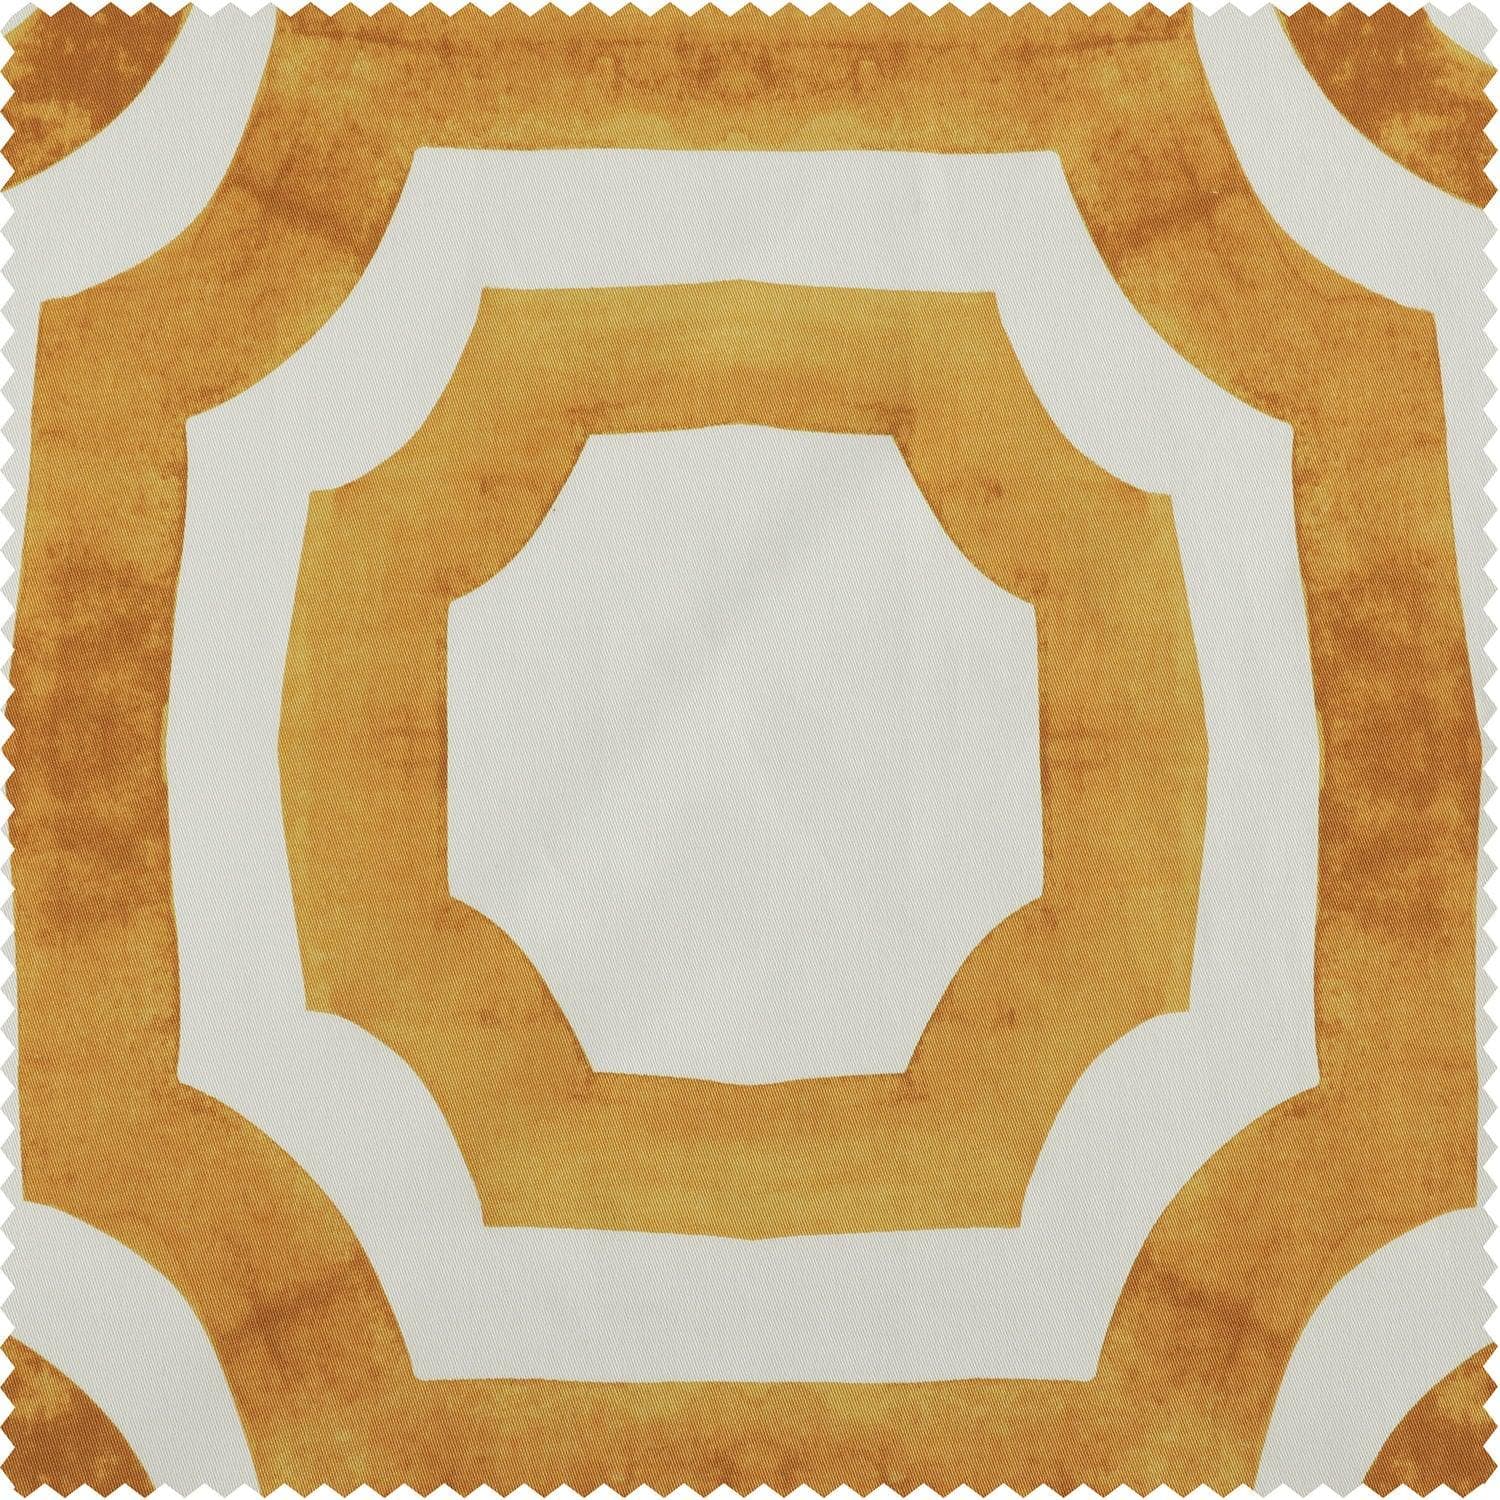 Mecca Gold Printed Cotton Table Runner & Placemats